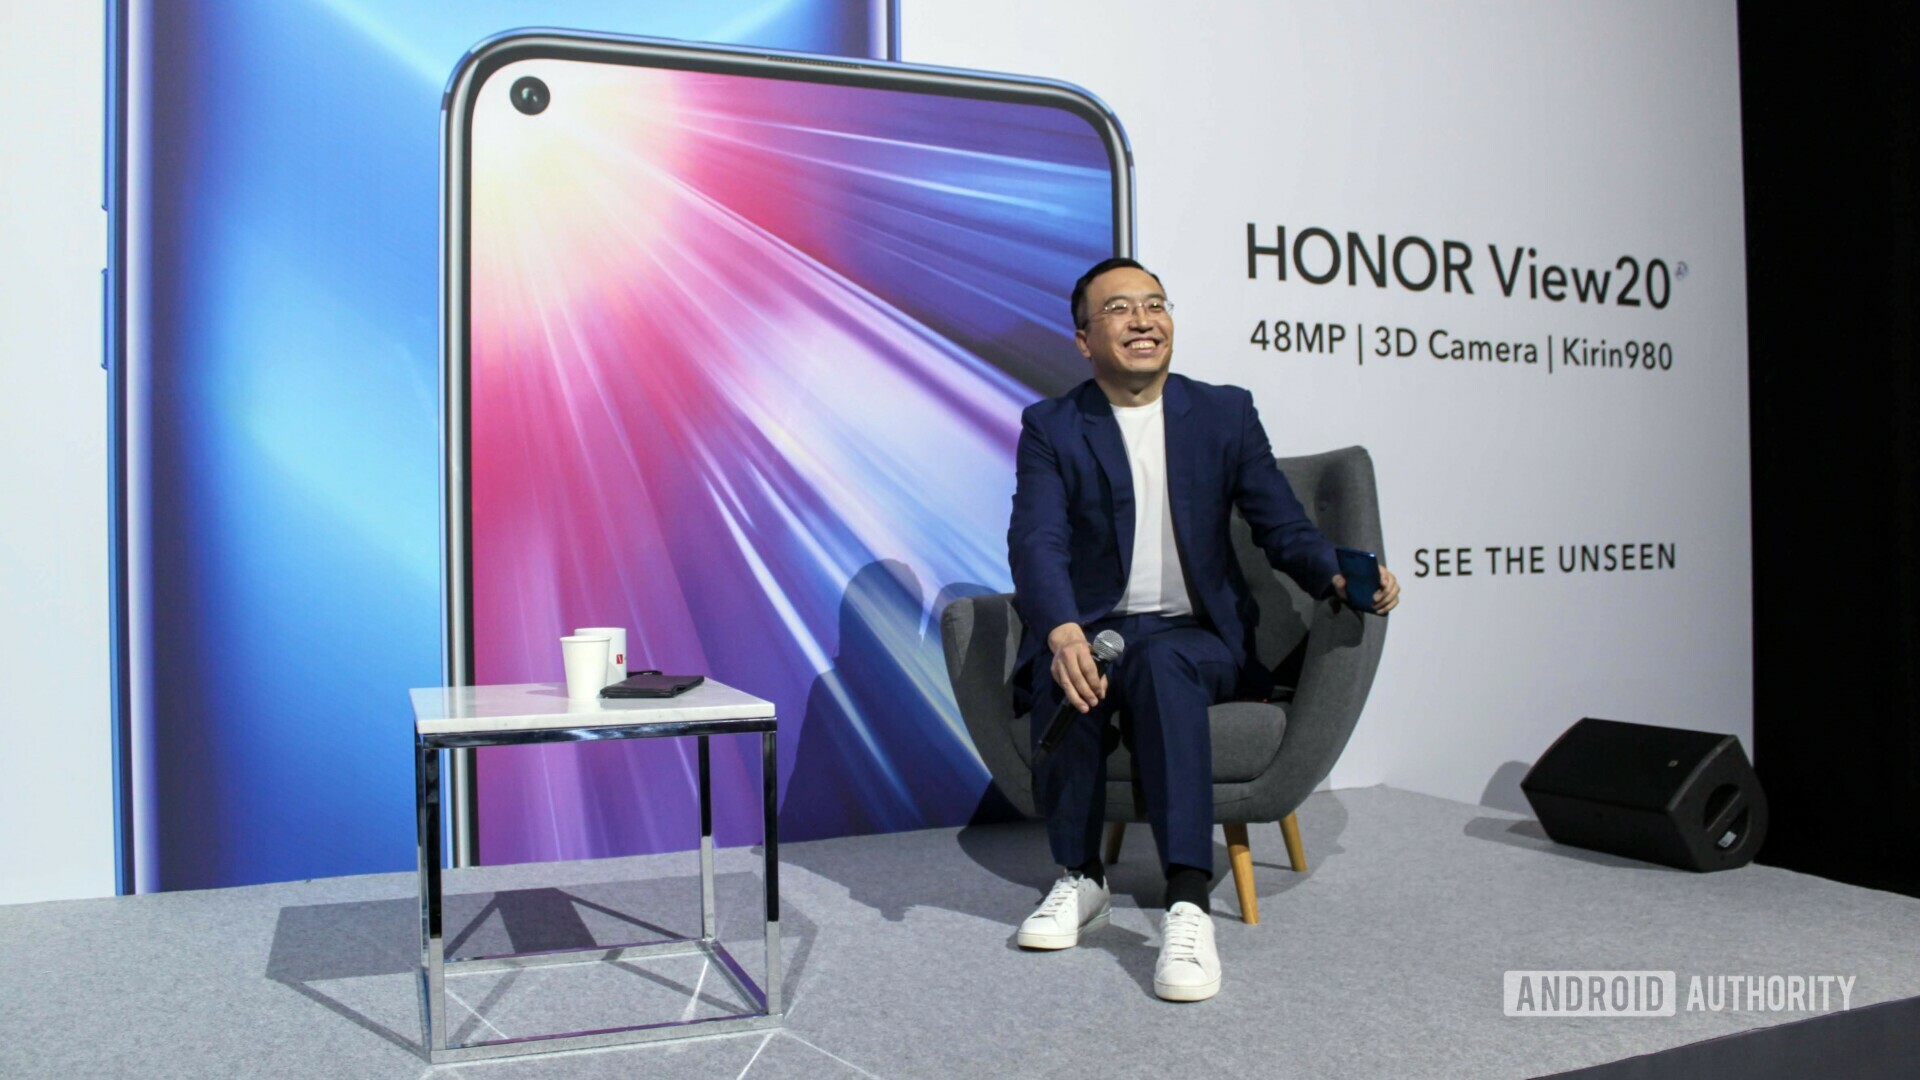 Honor's George Zhao at the HONOR View 20 launch event.